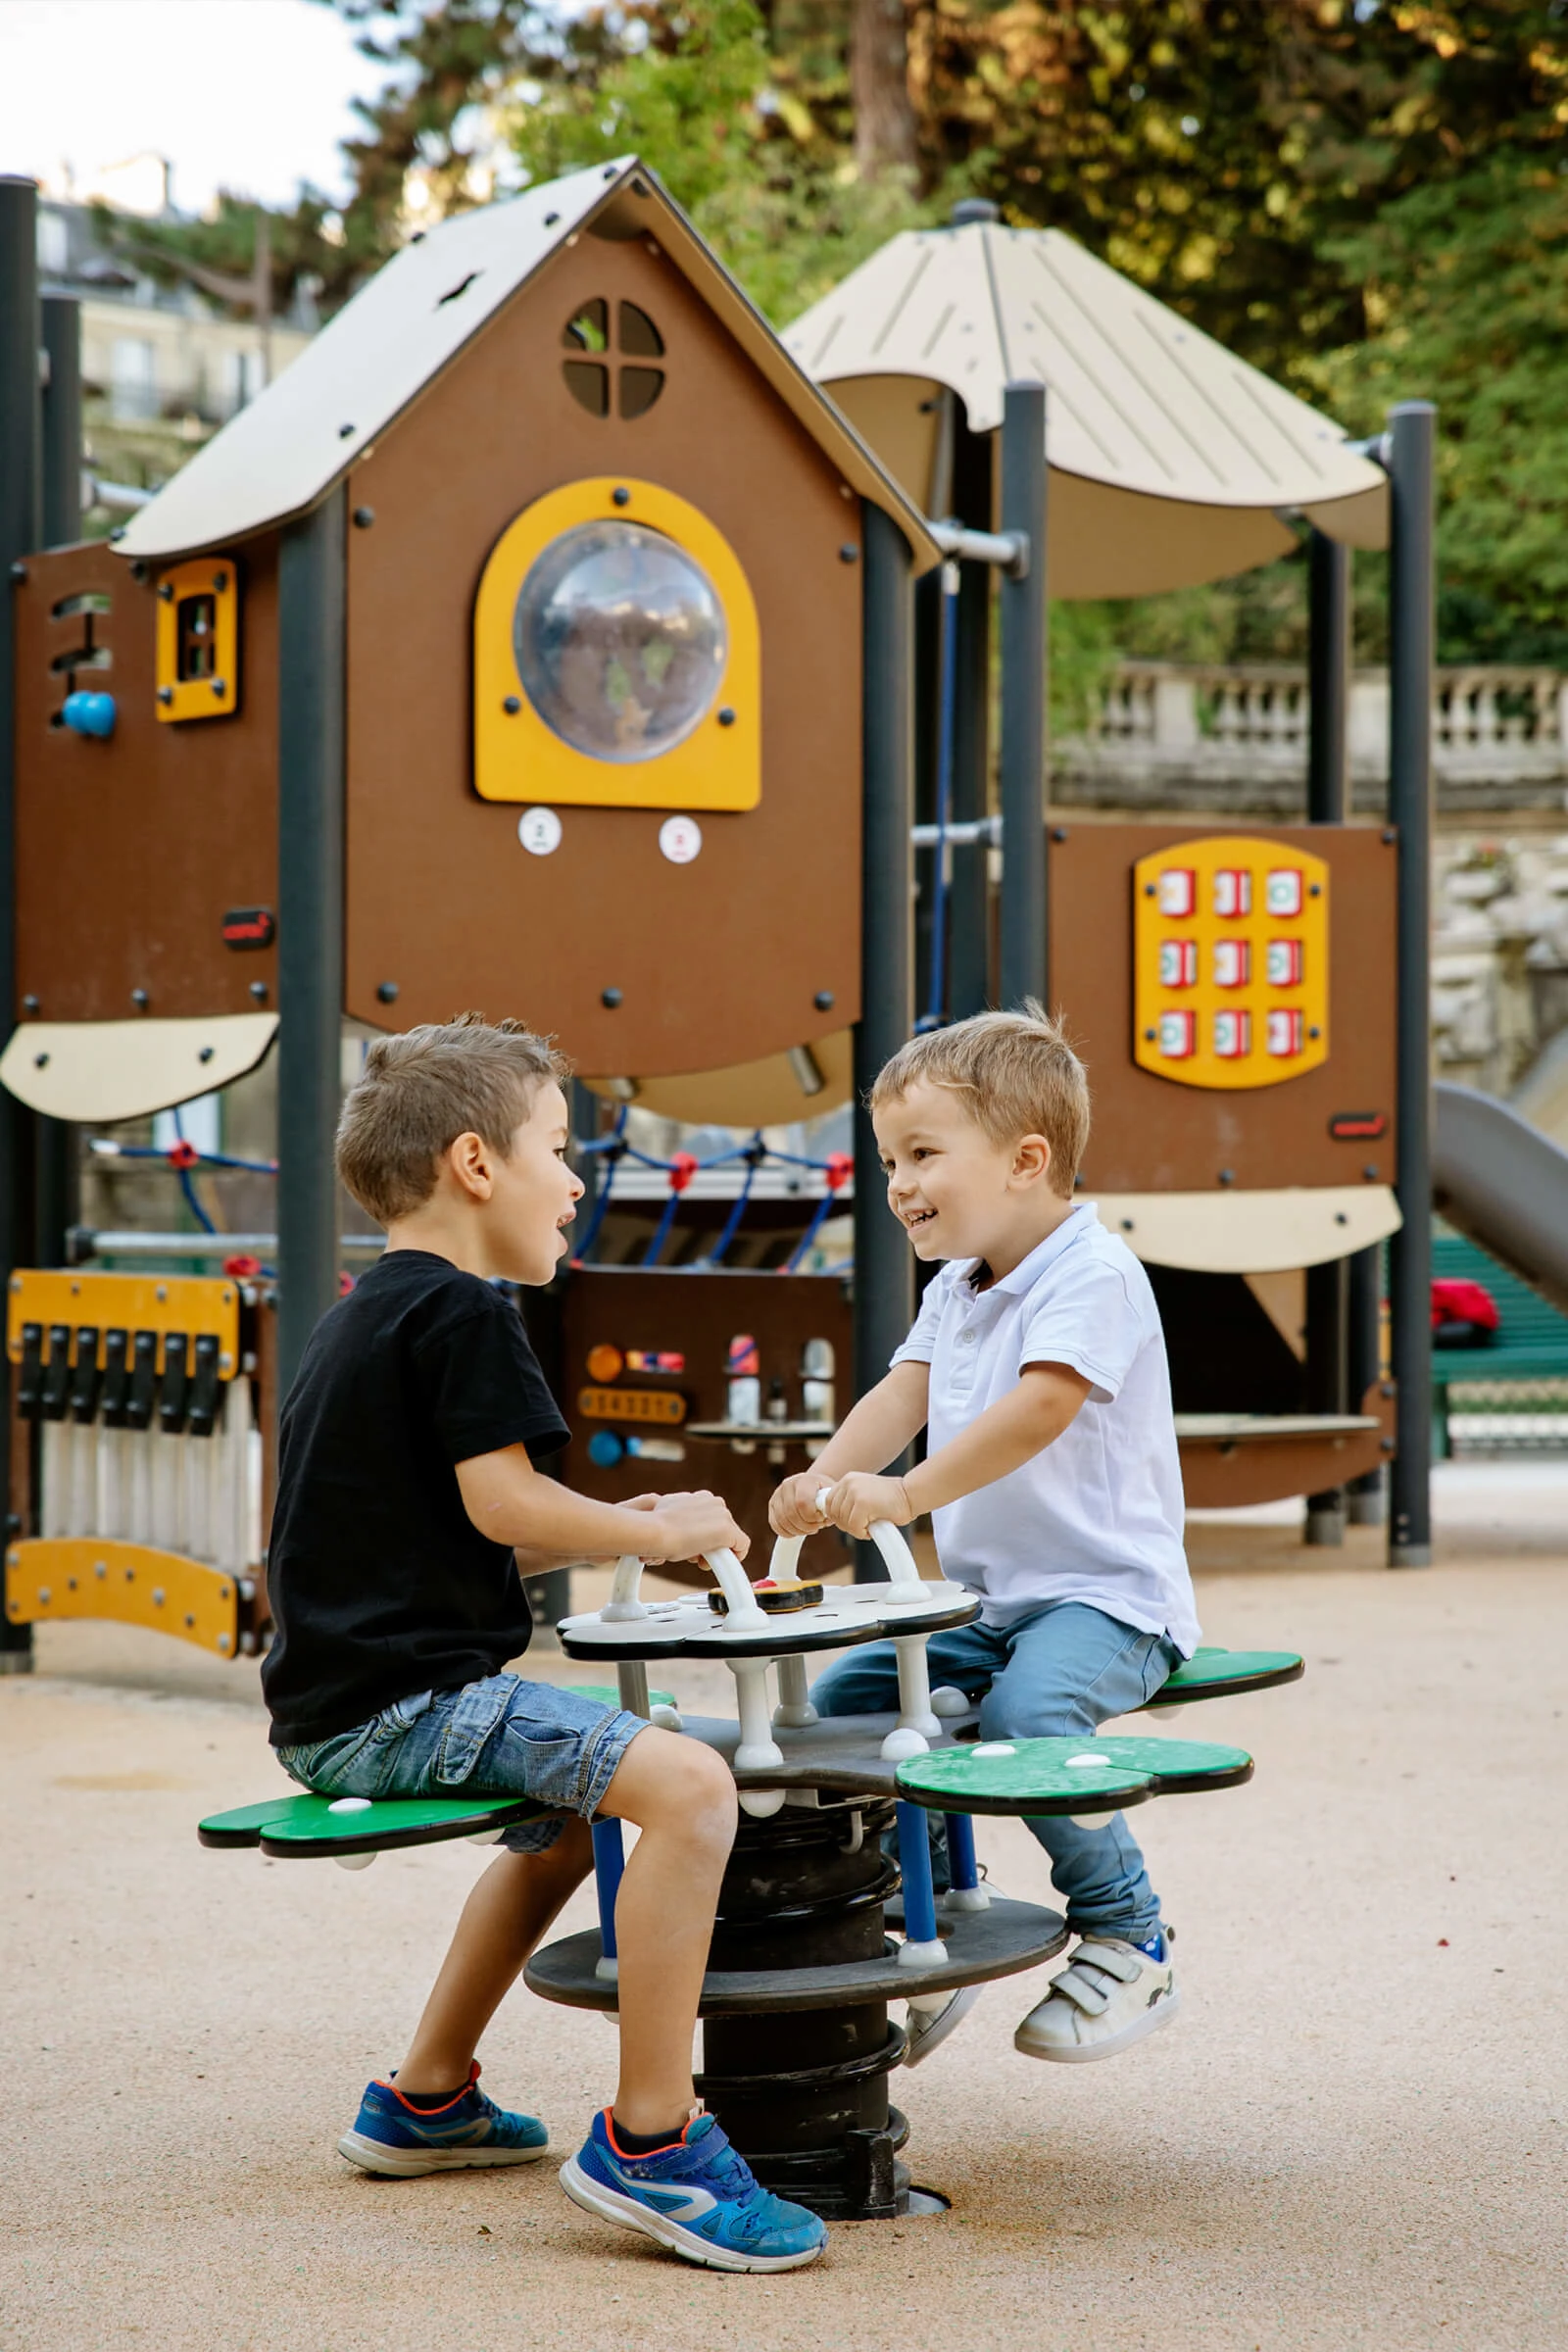 Children playing on a spring rocker at Square Capitan, France